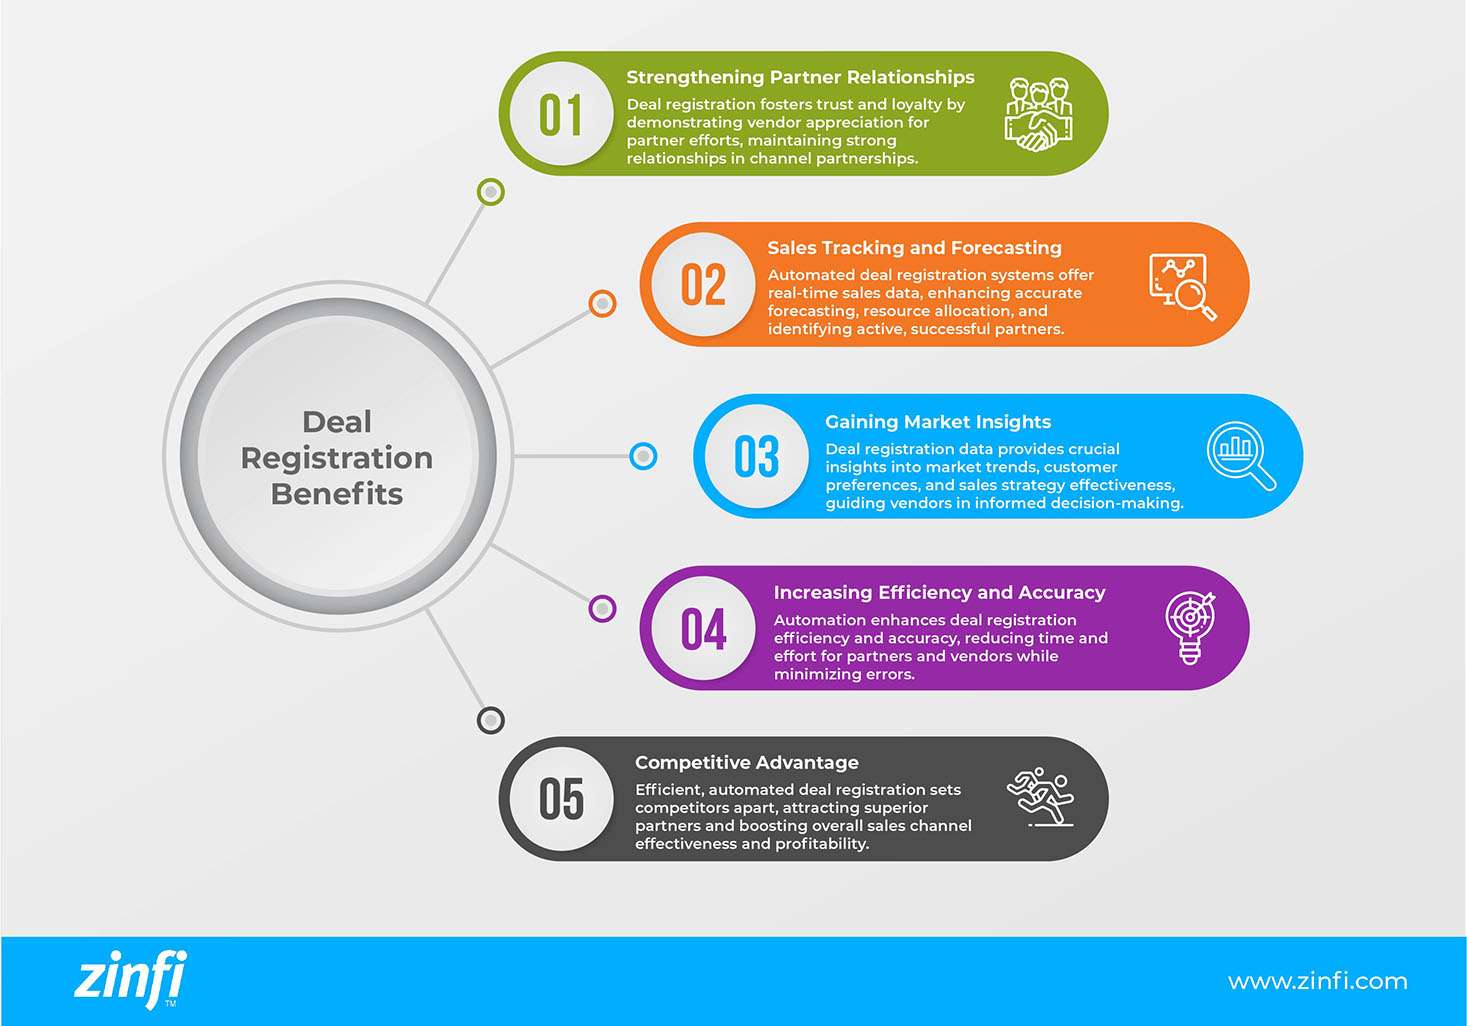 Infographic Depicting the Benefits of Deal Registration